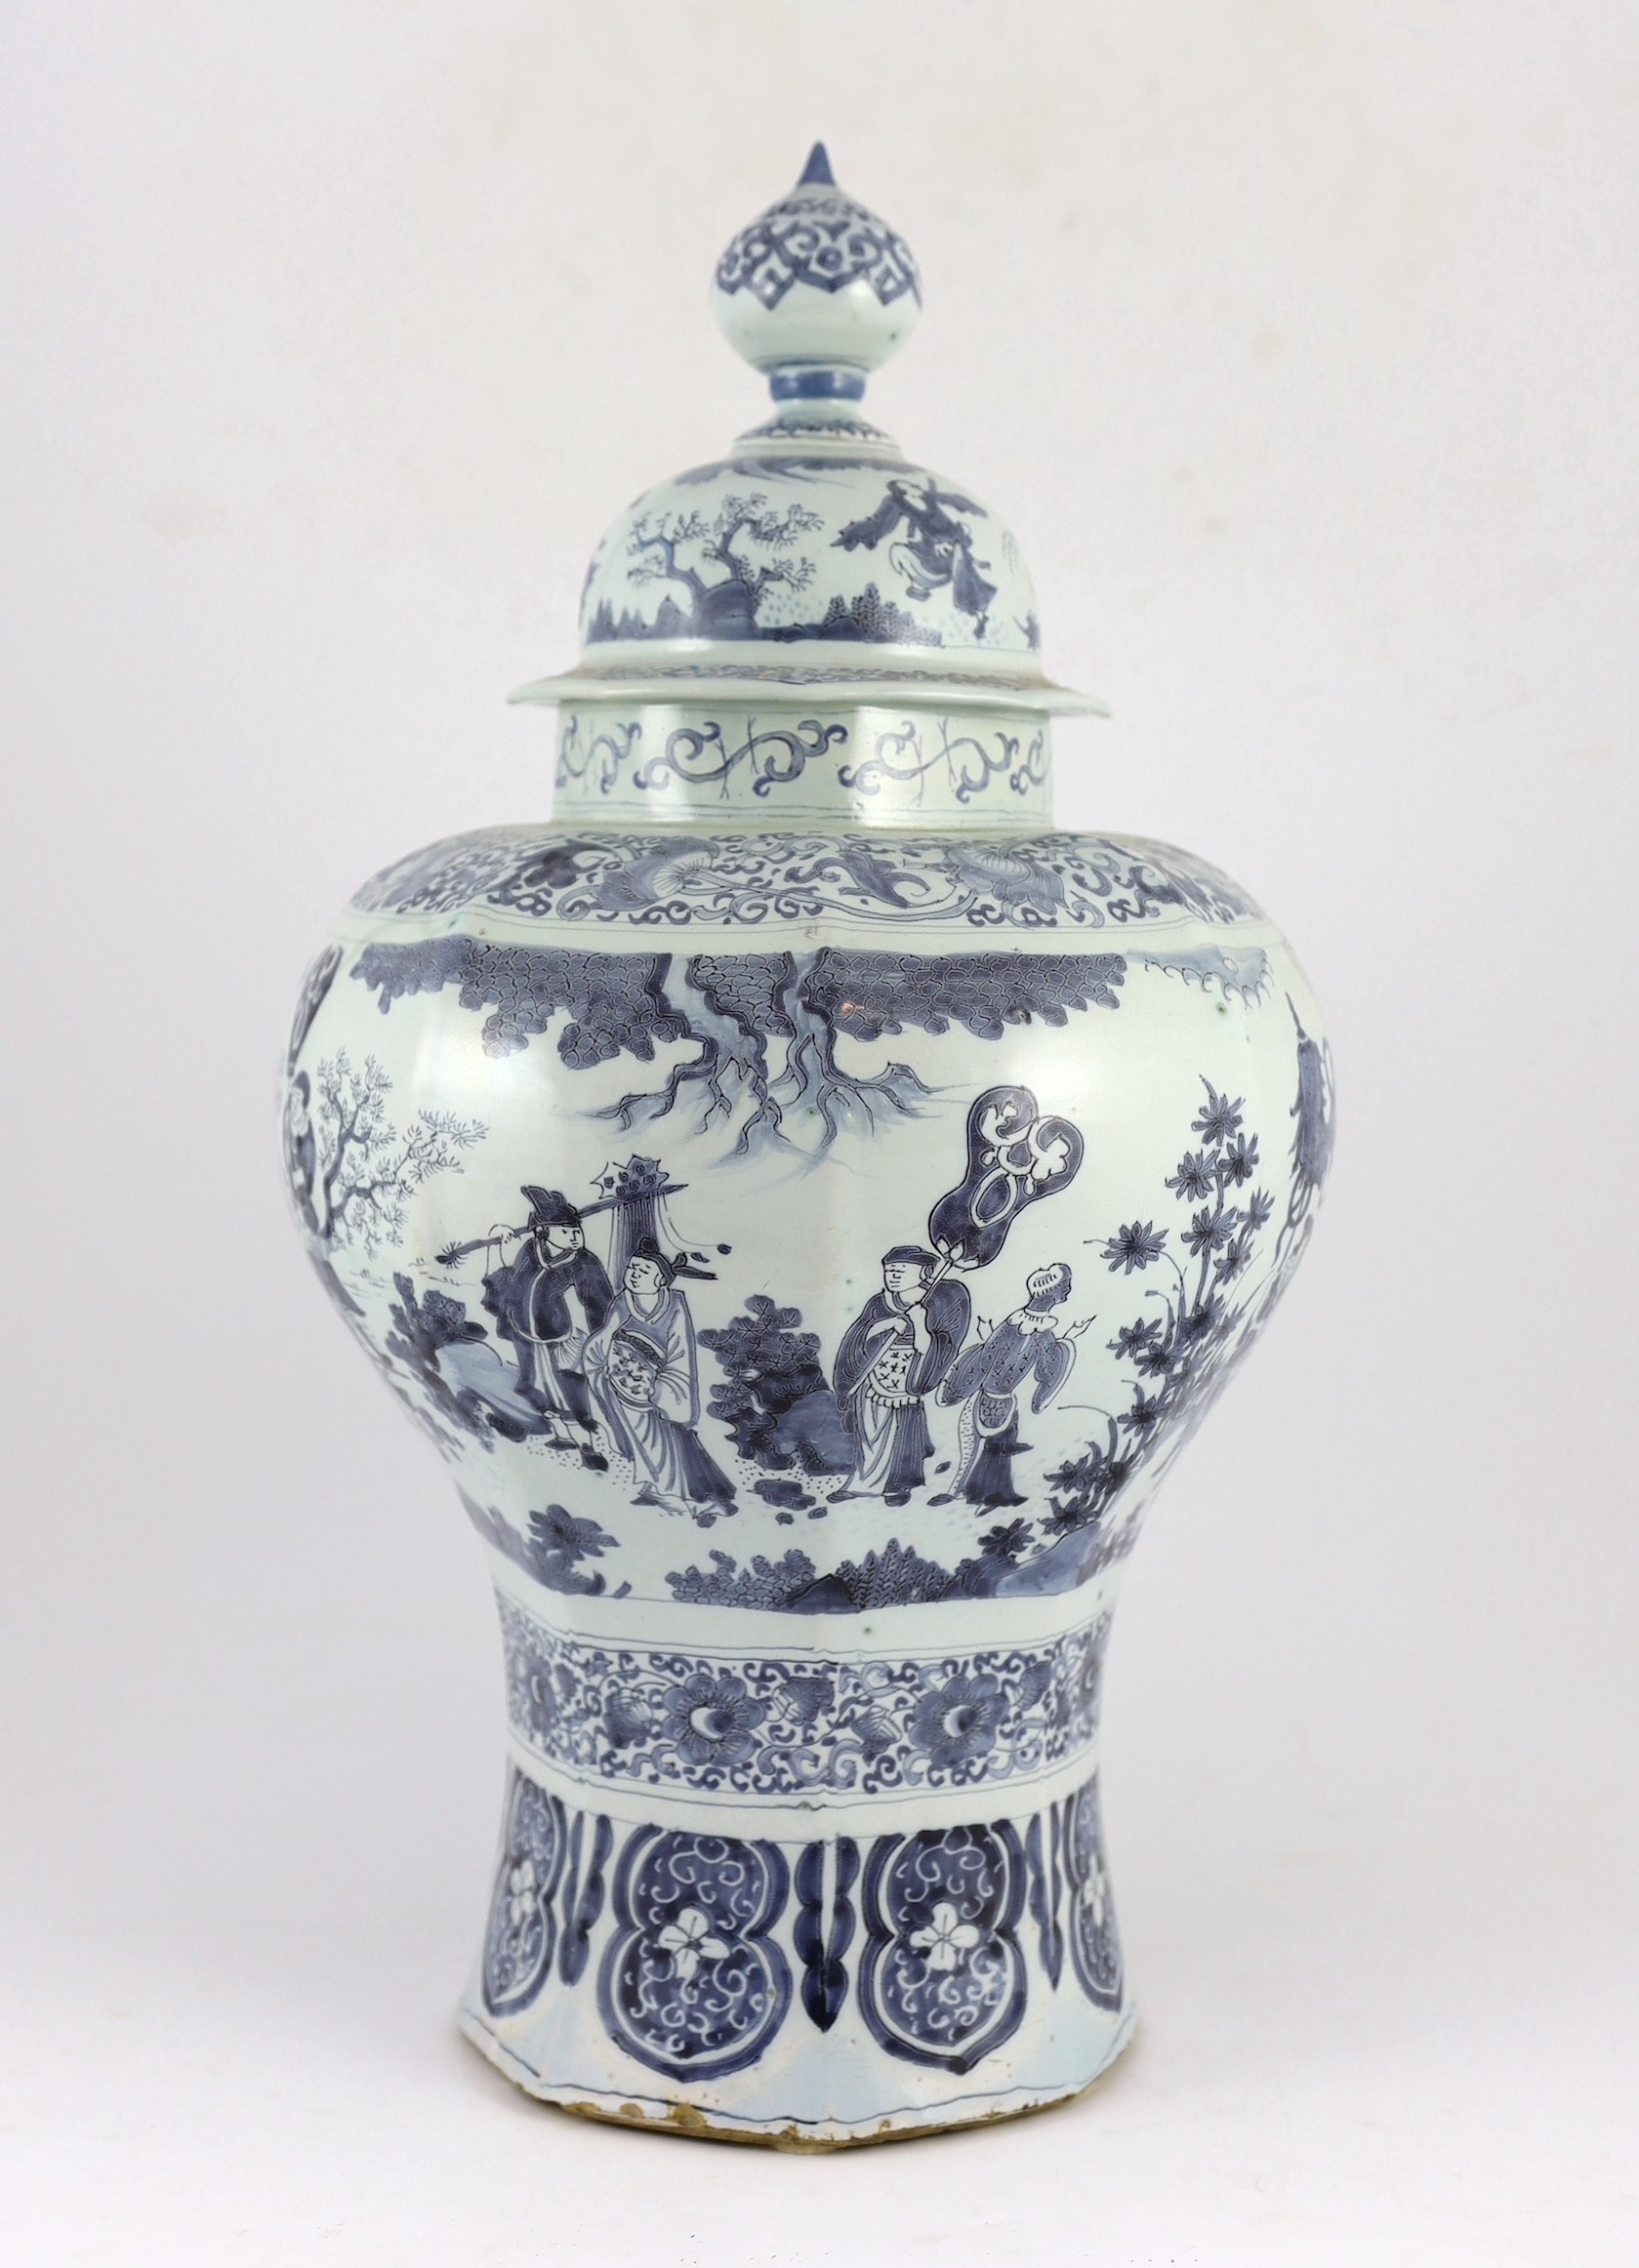 A massive Delft blue and white inverted baluster vase and cover, c.1700, 57.5cm high, neck and cover restored